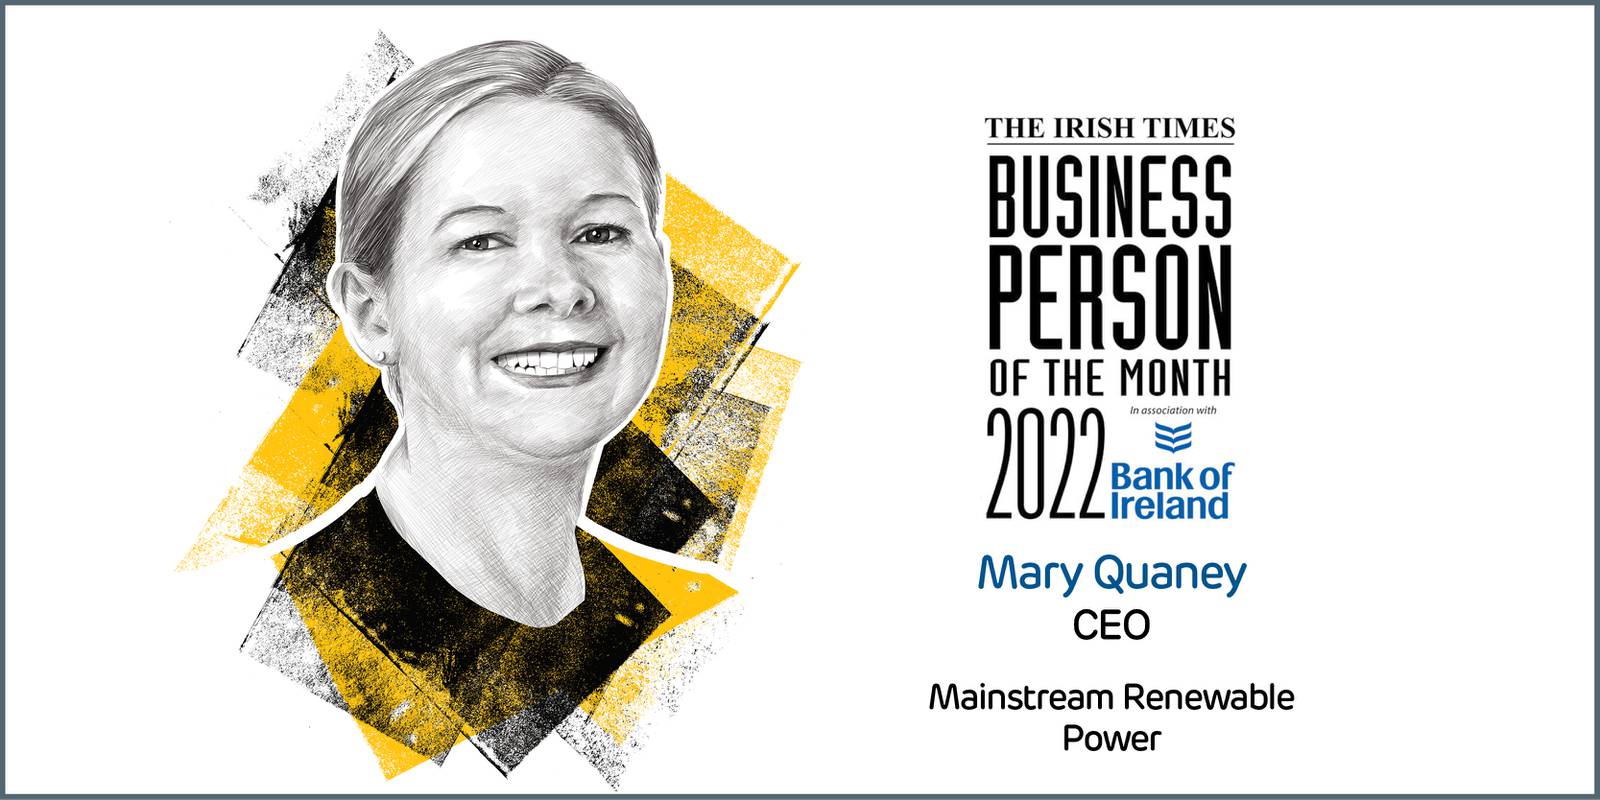 Business Person of the Month, August 2022 - Mary Quaney, Mainstream Renewable Power